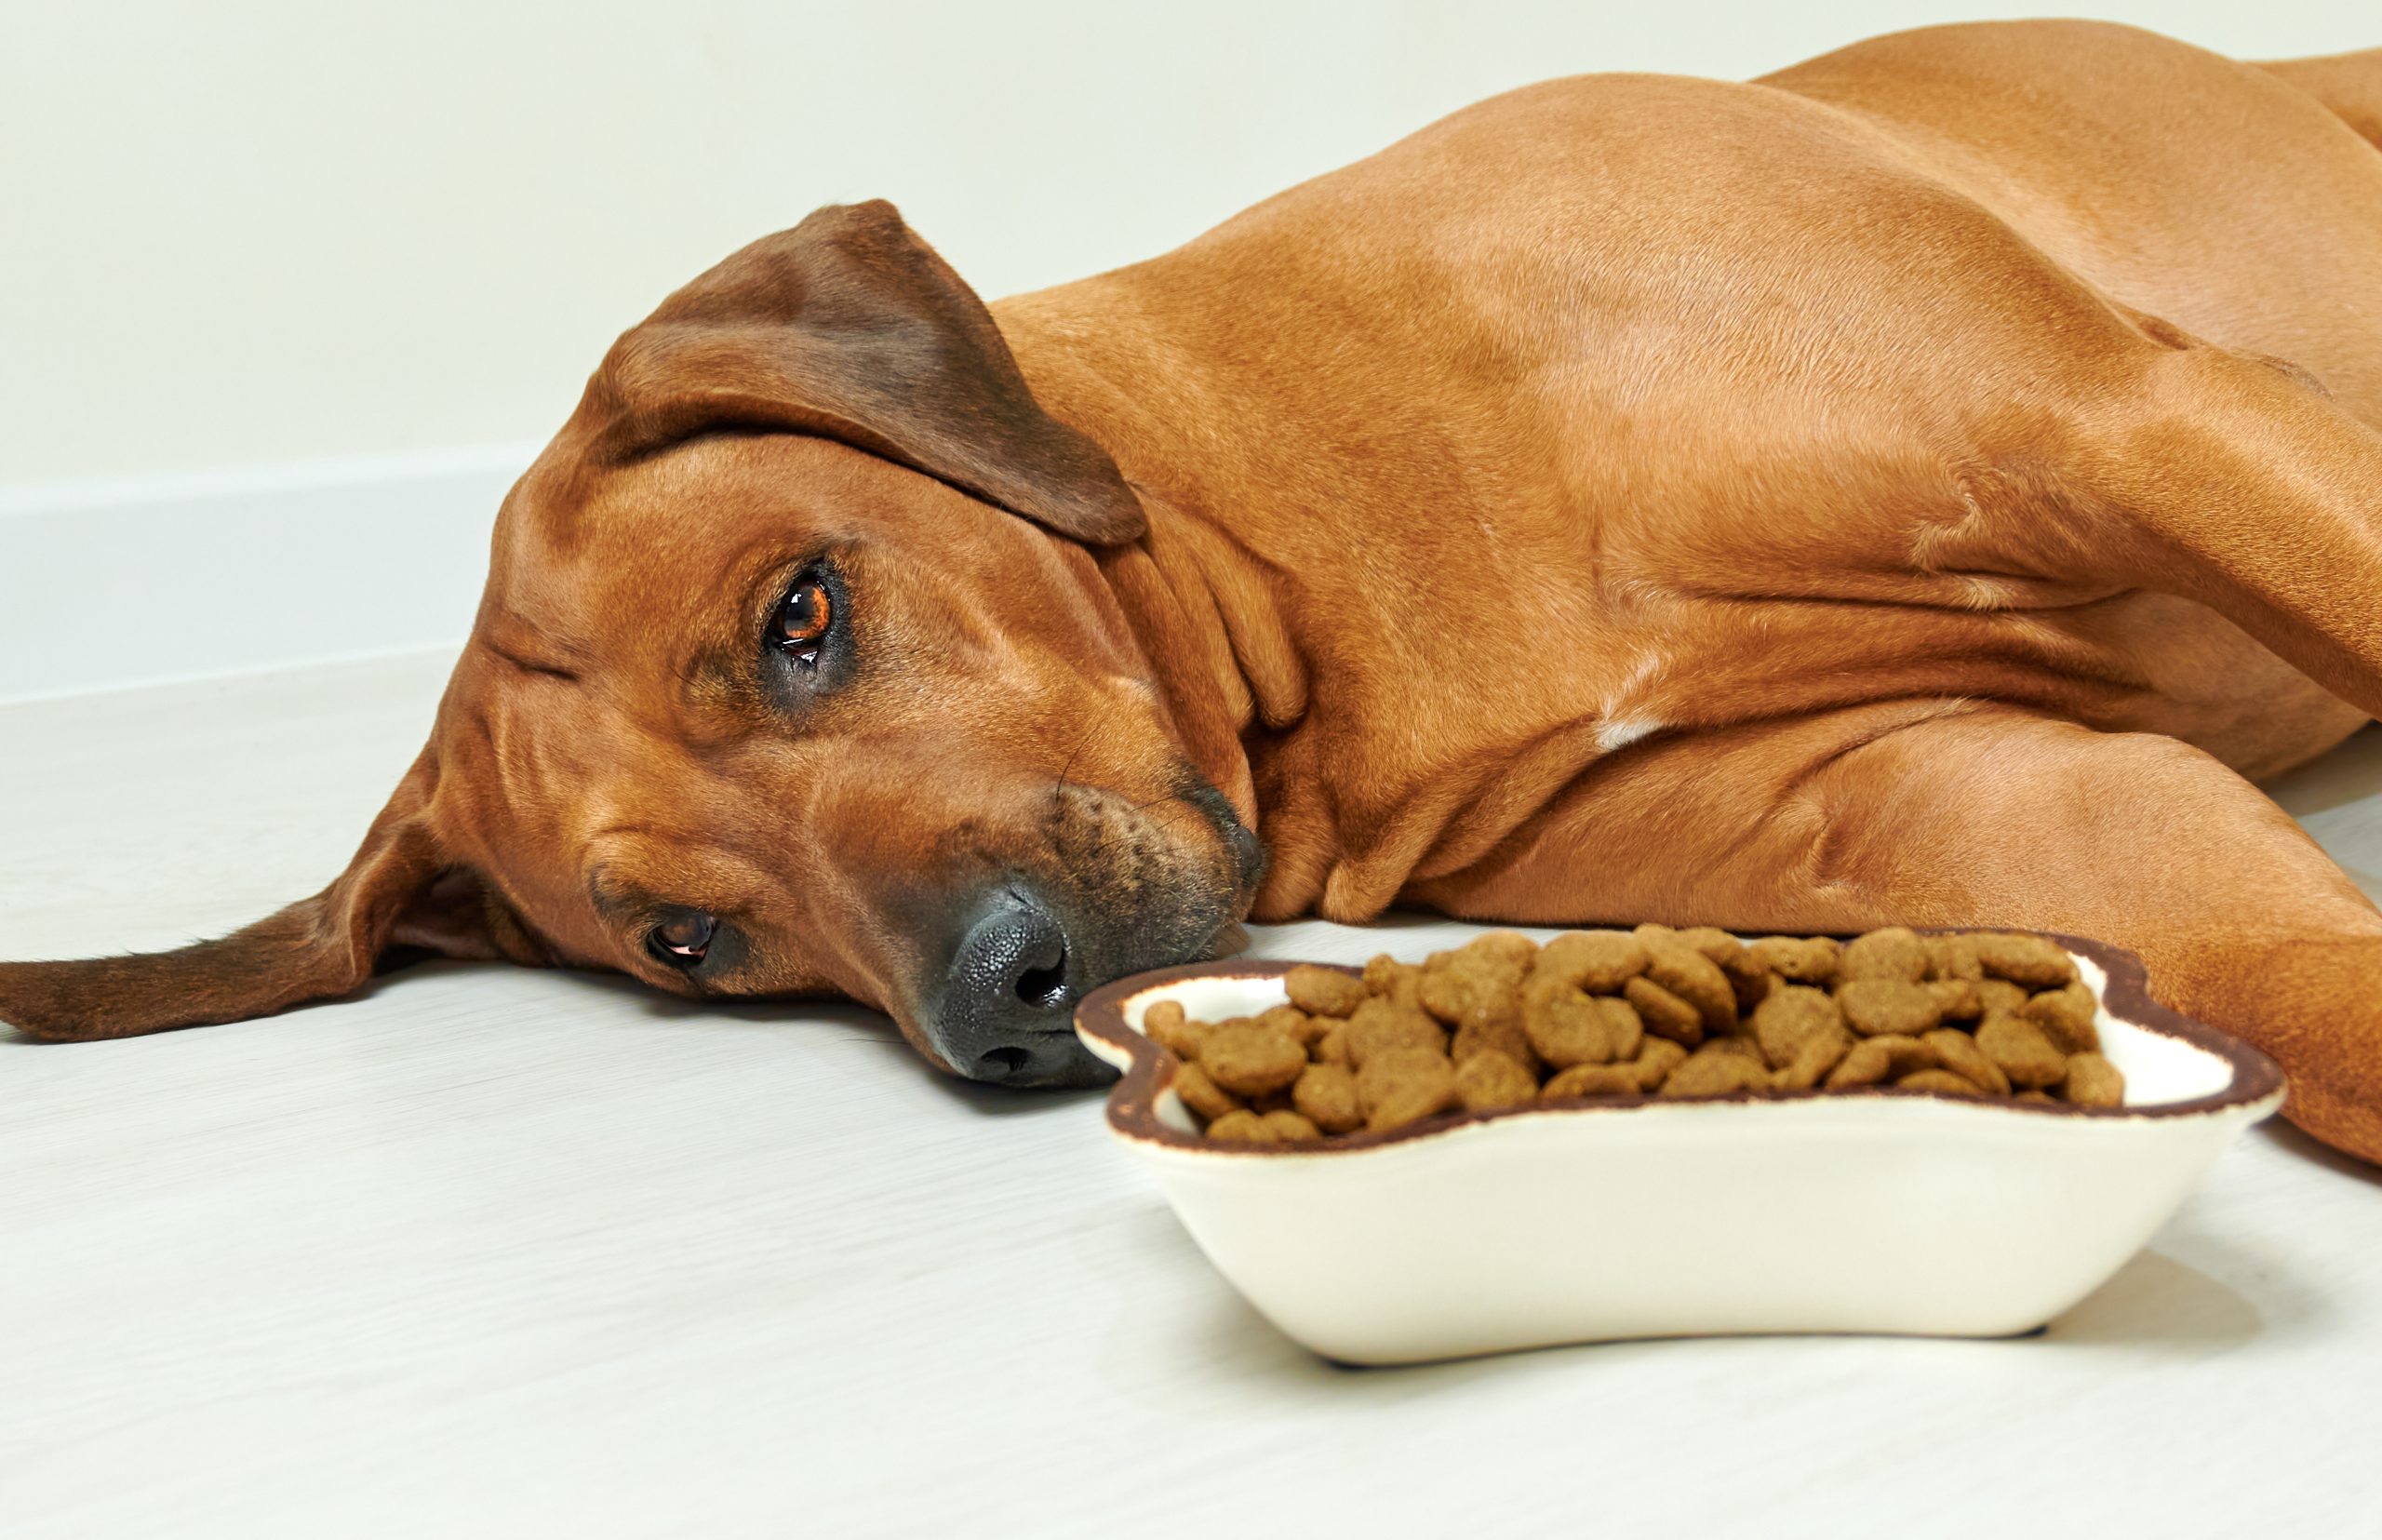 5 strange dog eating habits and what they mean about your pup